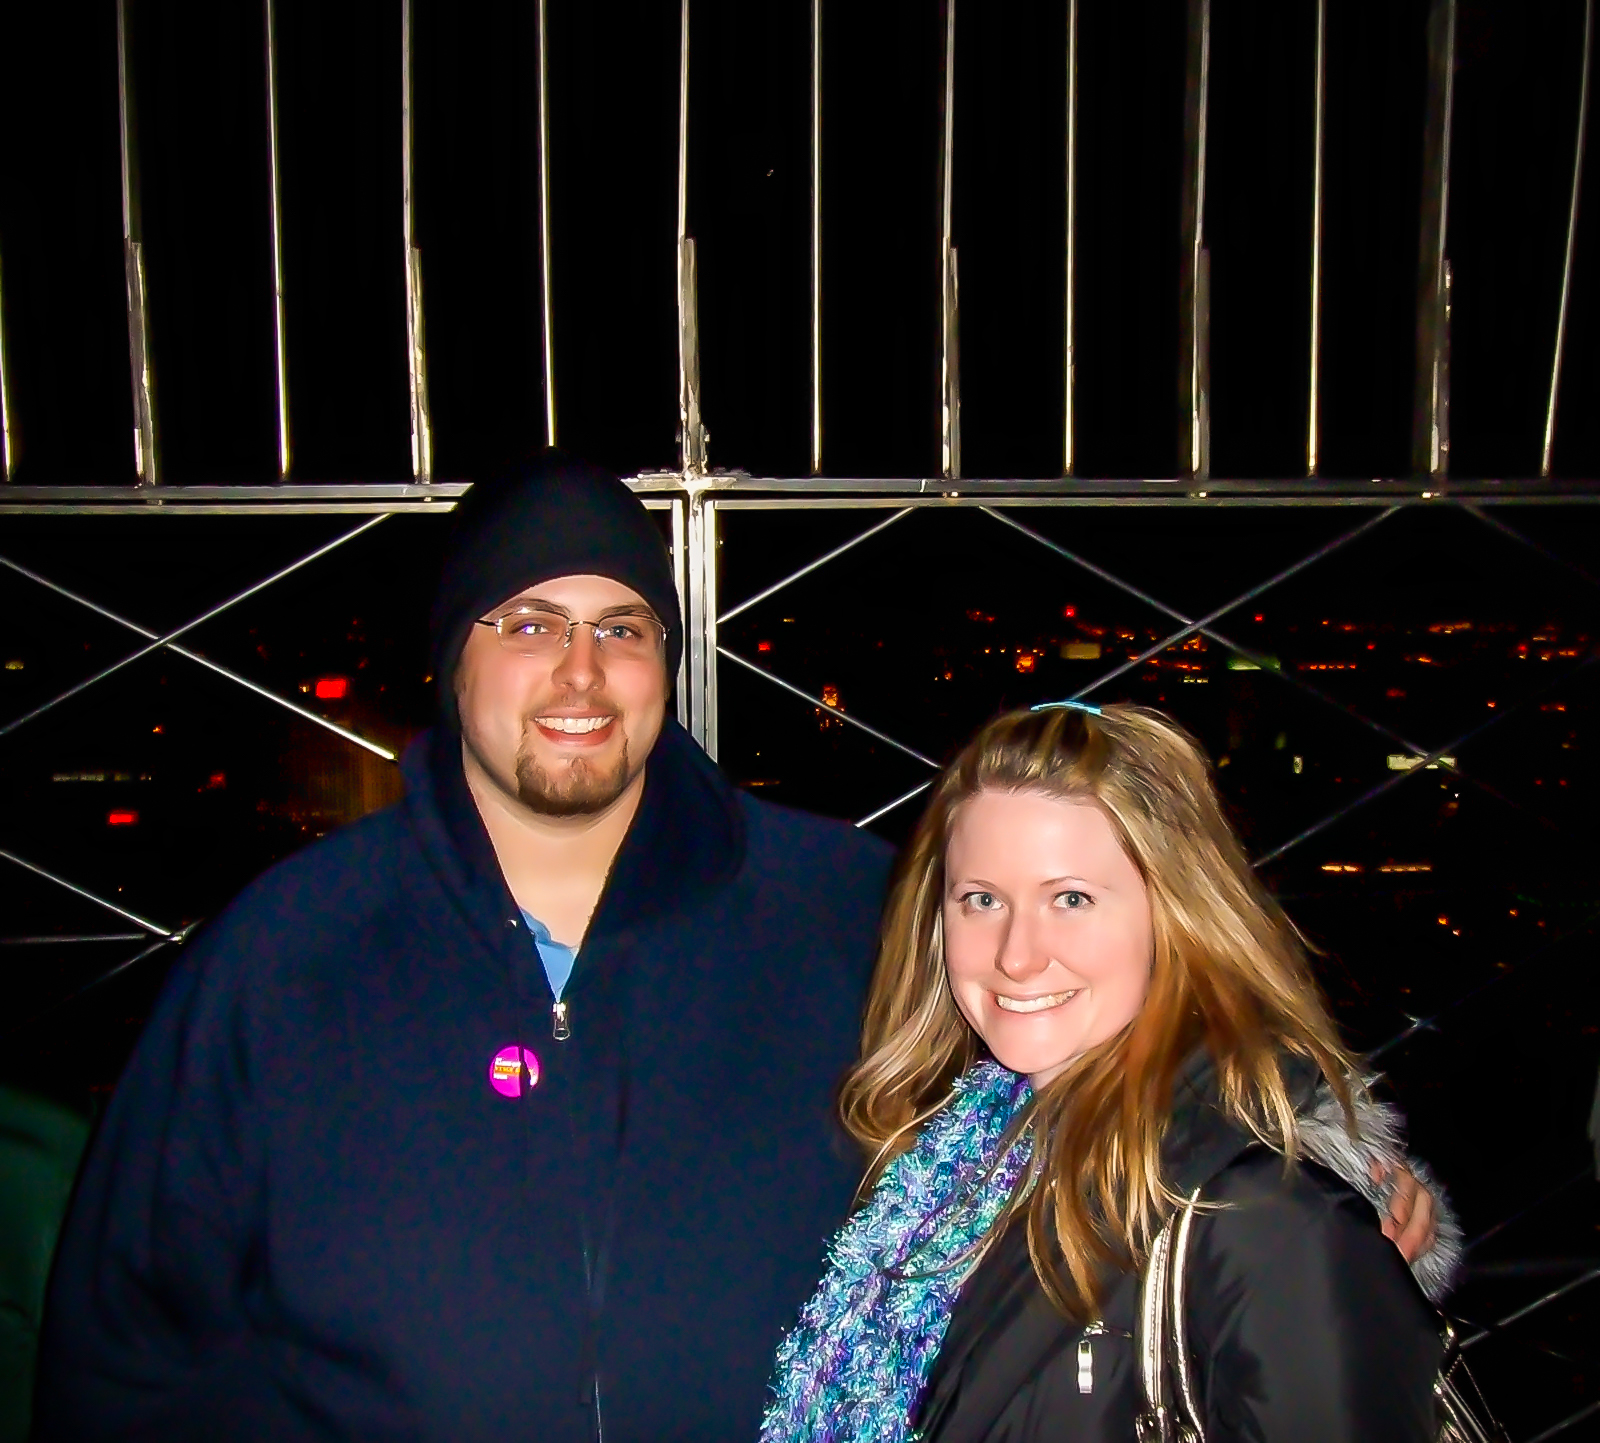 Jennifer and Patrick on the 86th Floor Observatory